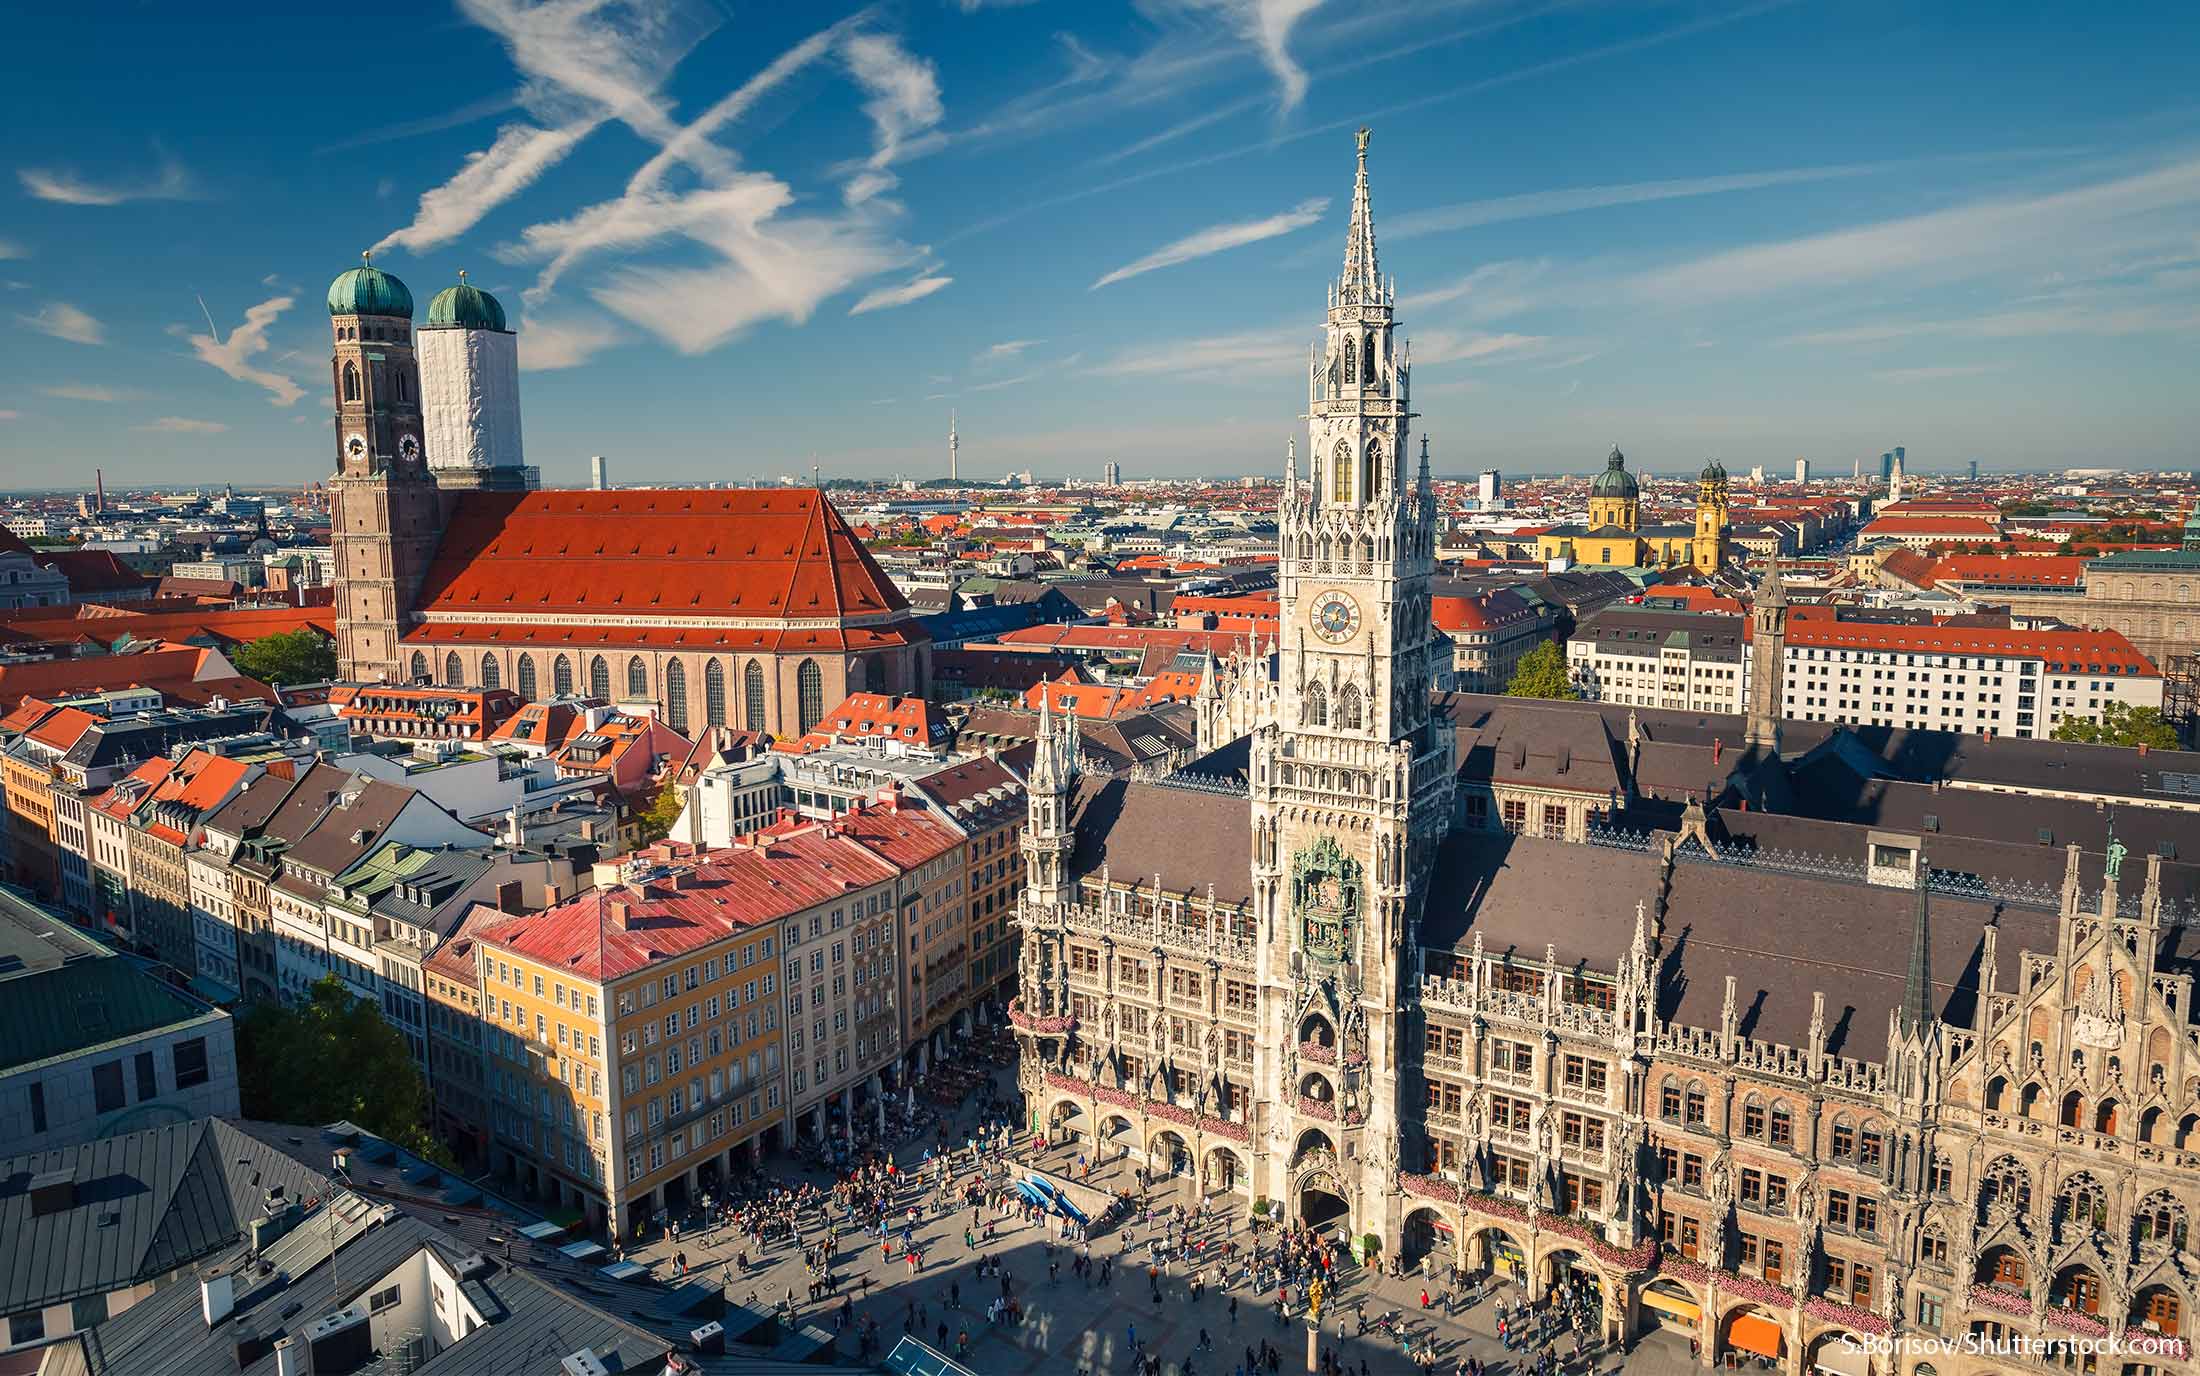 <ul> <li>Room rates at Motel One start at around $85 per night.</li> </ul> <p>The dollar is standing at one of its strongest points compared with the euro, making travel to Germany and other euro-zone countries more affordable than in years past. If you opt for Munich, Travel and Leisure recommended bellying up at the local biergarten for a pint, or scouting the aisles of the Christmas markets for a hot mulled wine stand.</p>